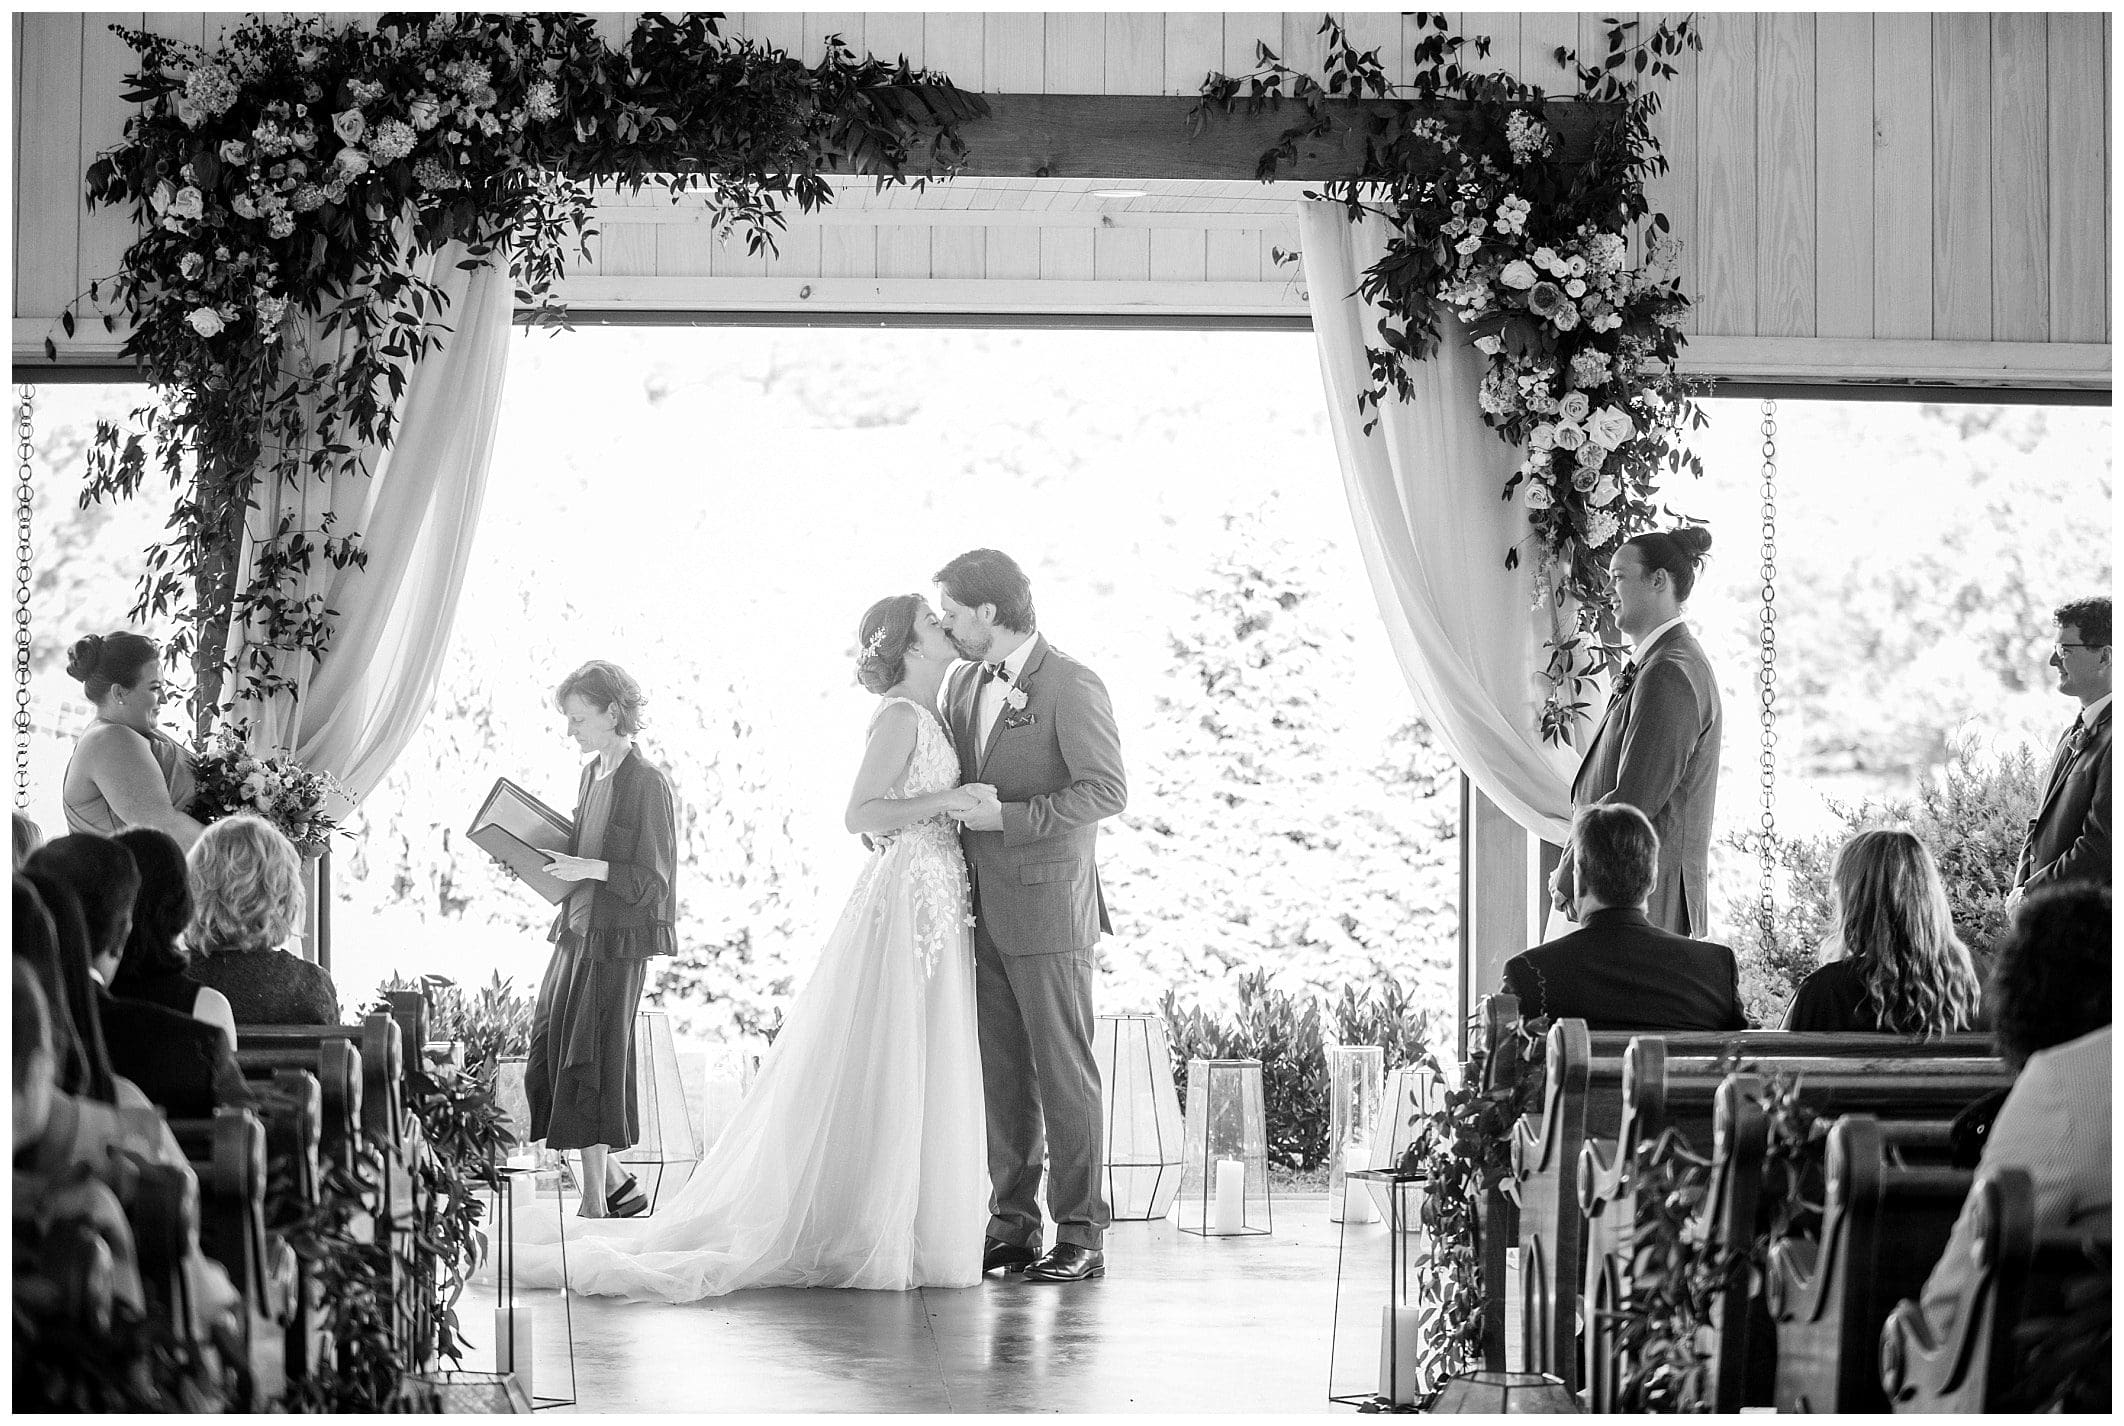 A black and white photo of a bride and groom kissing under an arch.